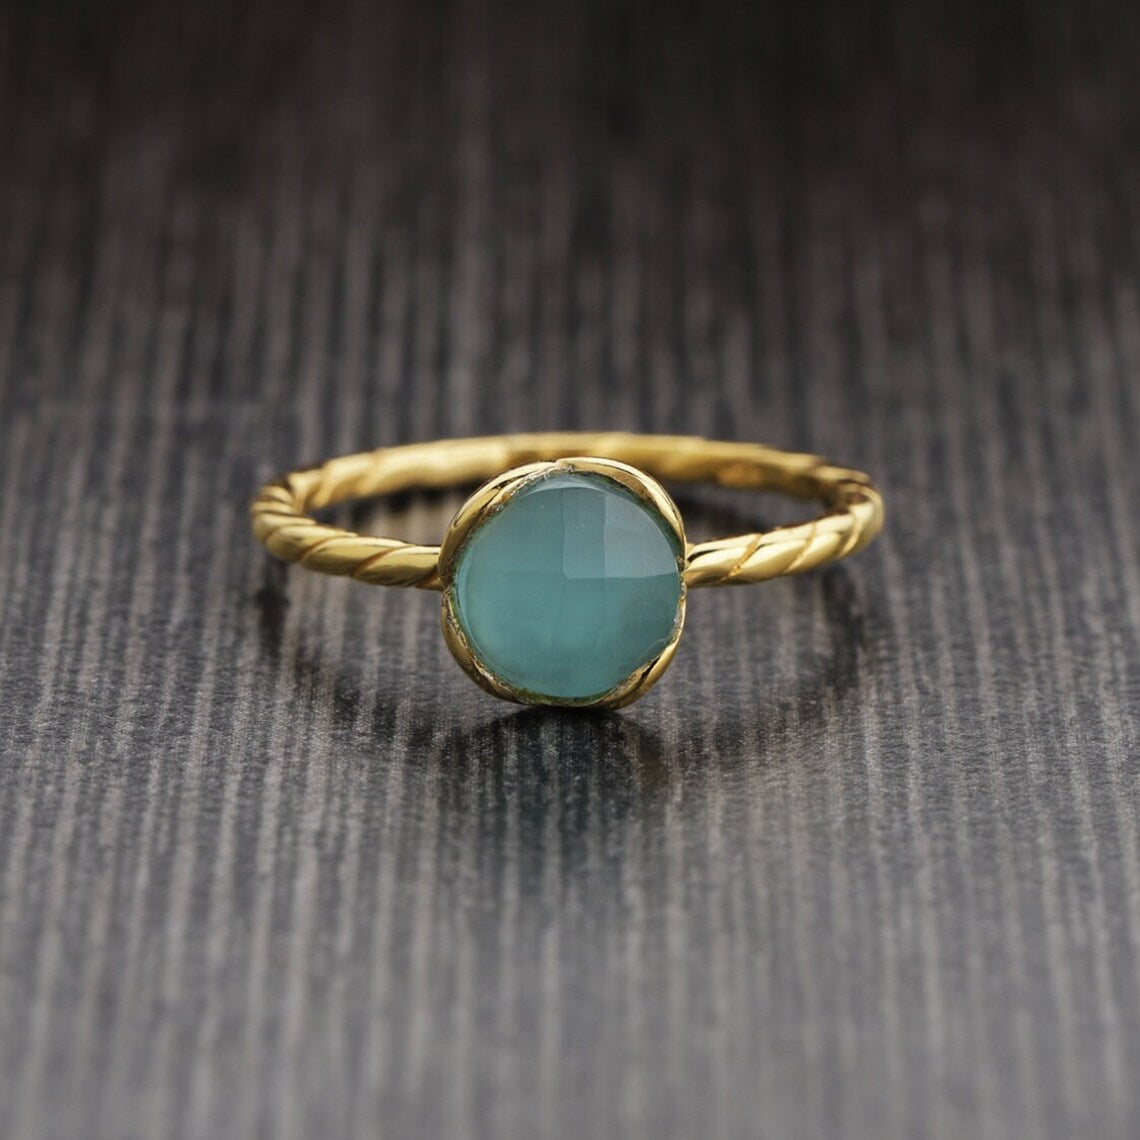 Twisted Band Ring - Blue Chalcedony Gold Plated Sterling Silver Ring